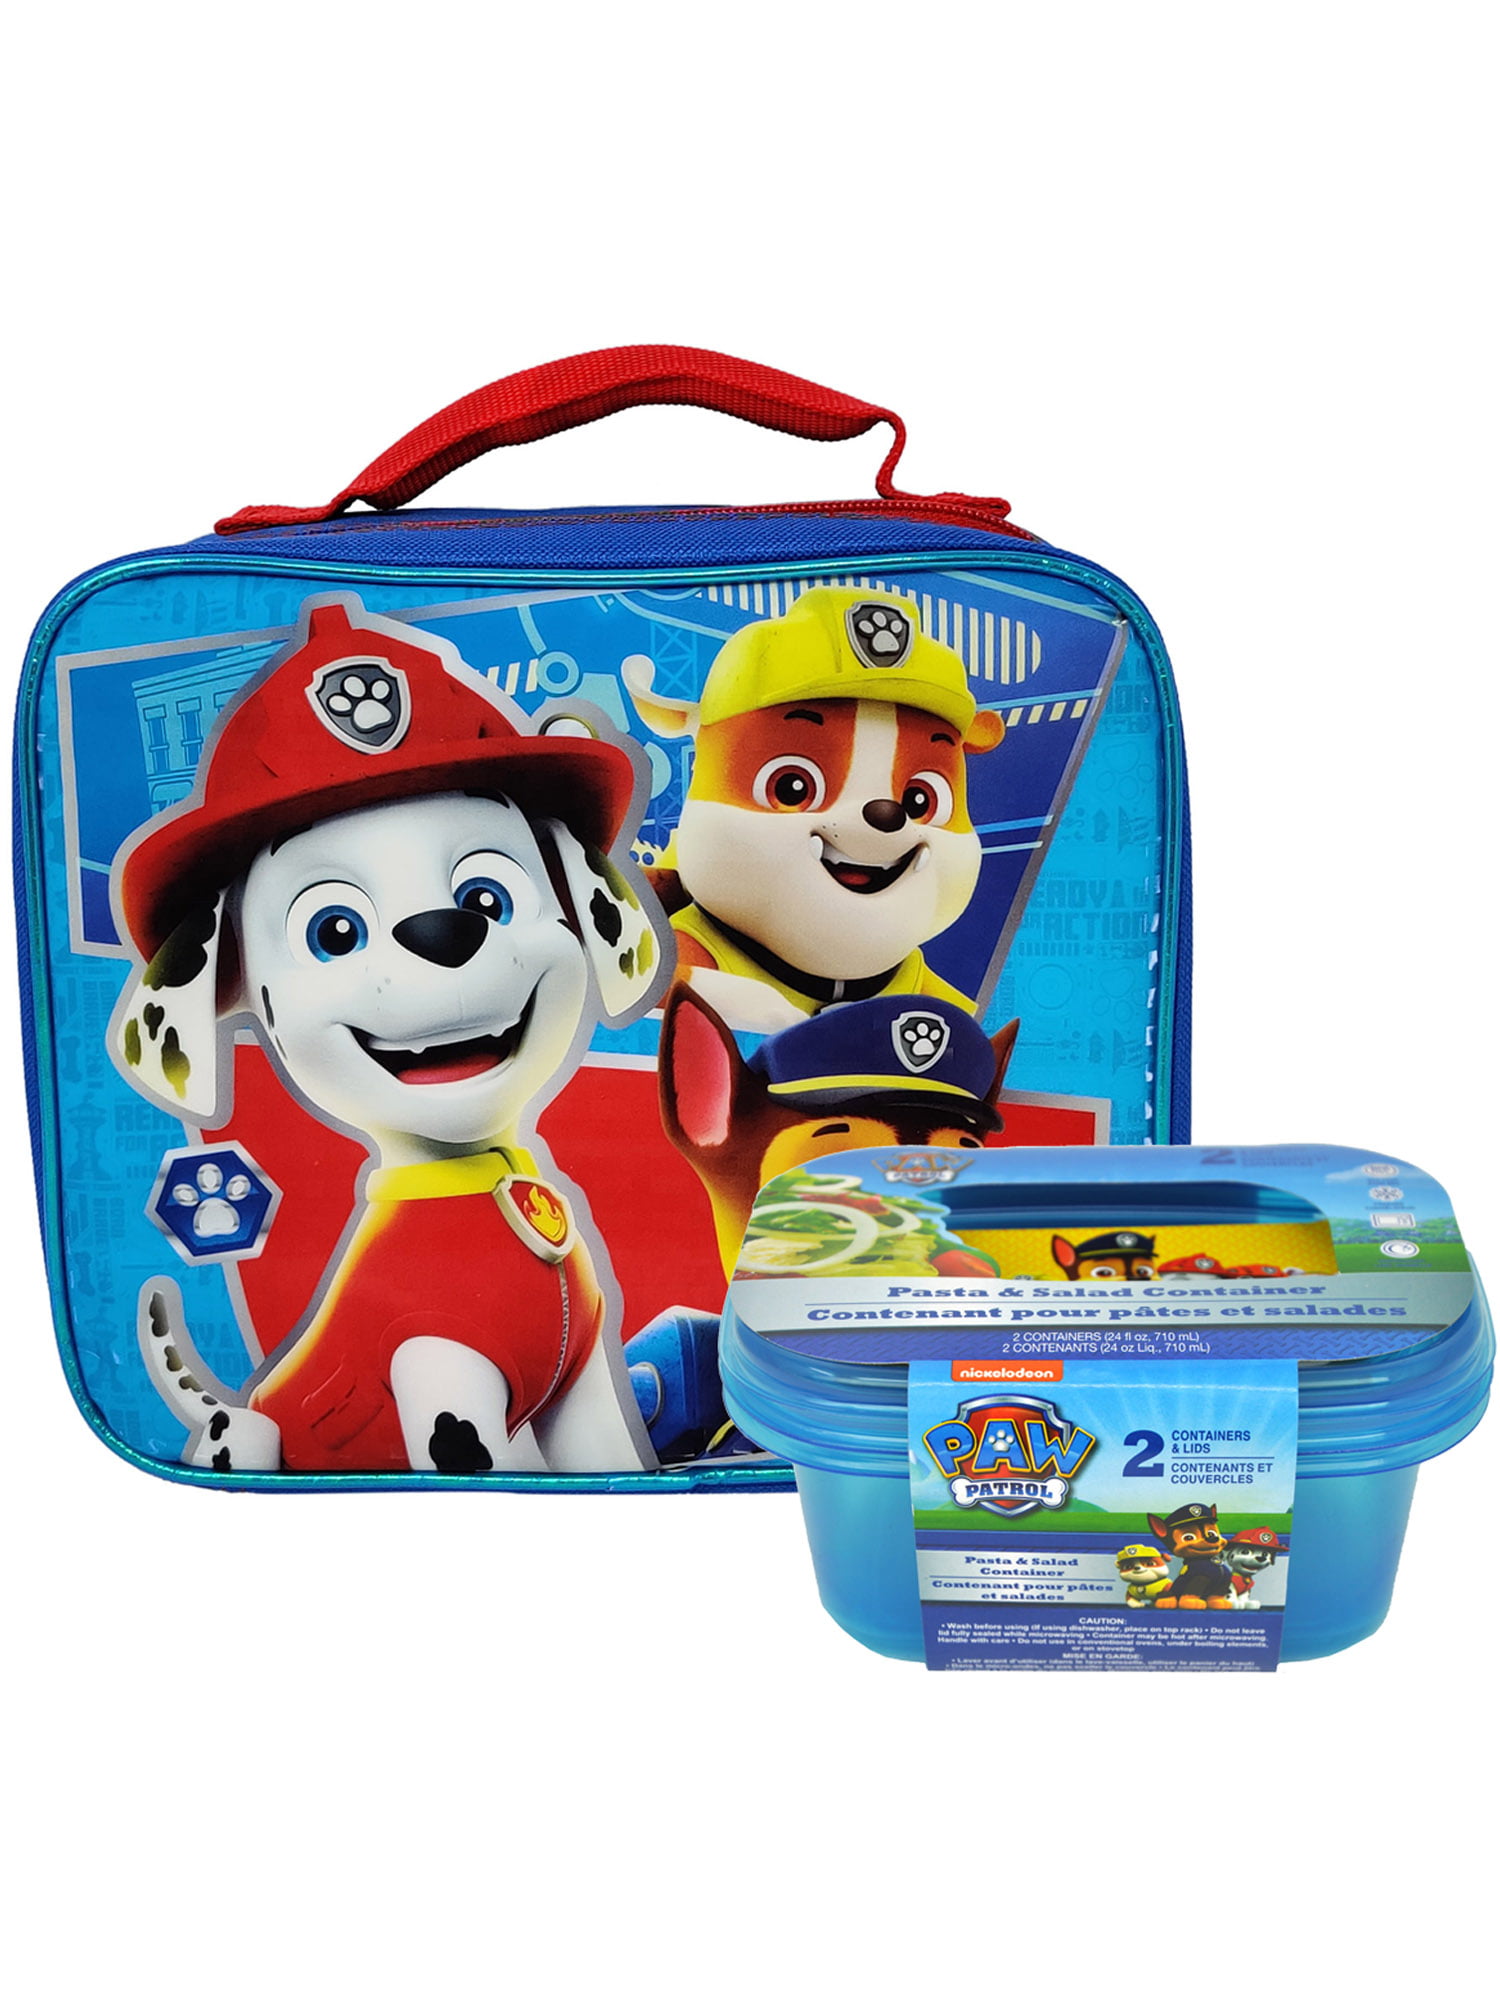 Paw Patrol Lunch Bag Thermal Insulated School Picnic Sandwich Box Marshall Chase 